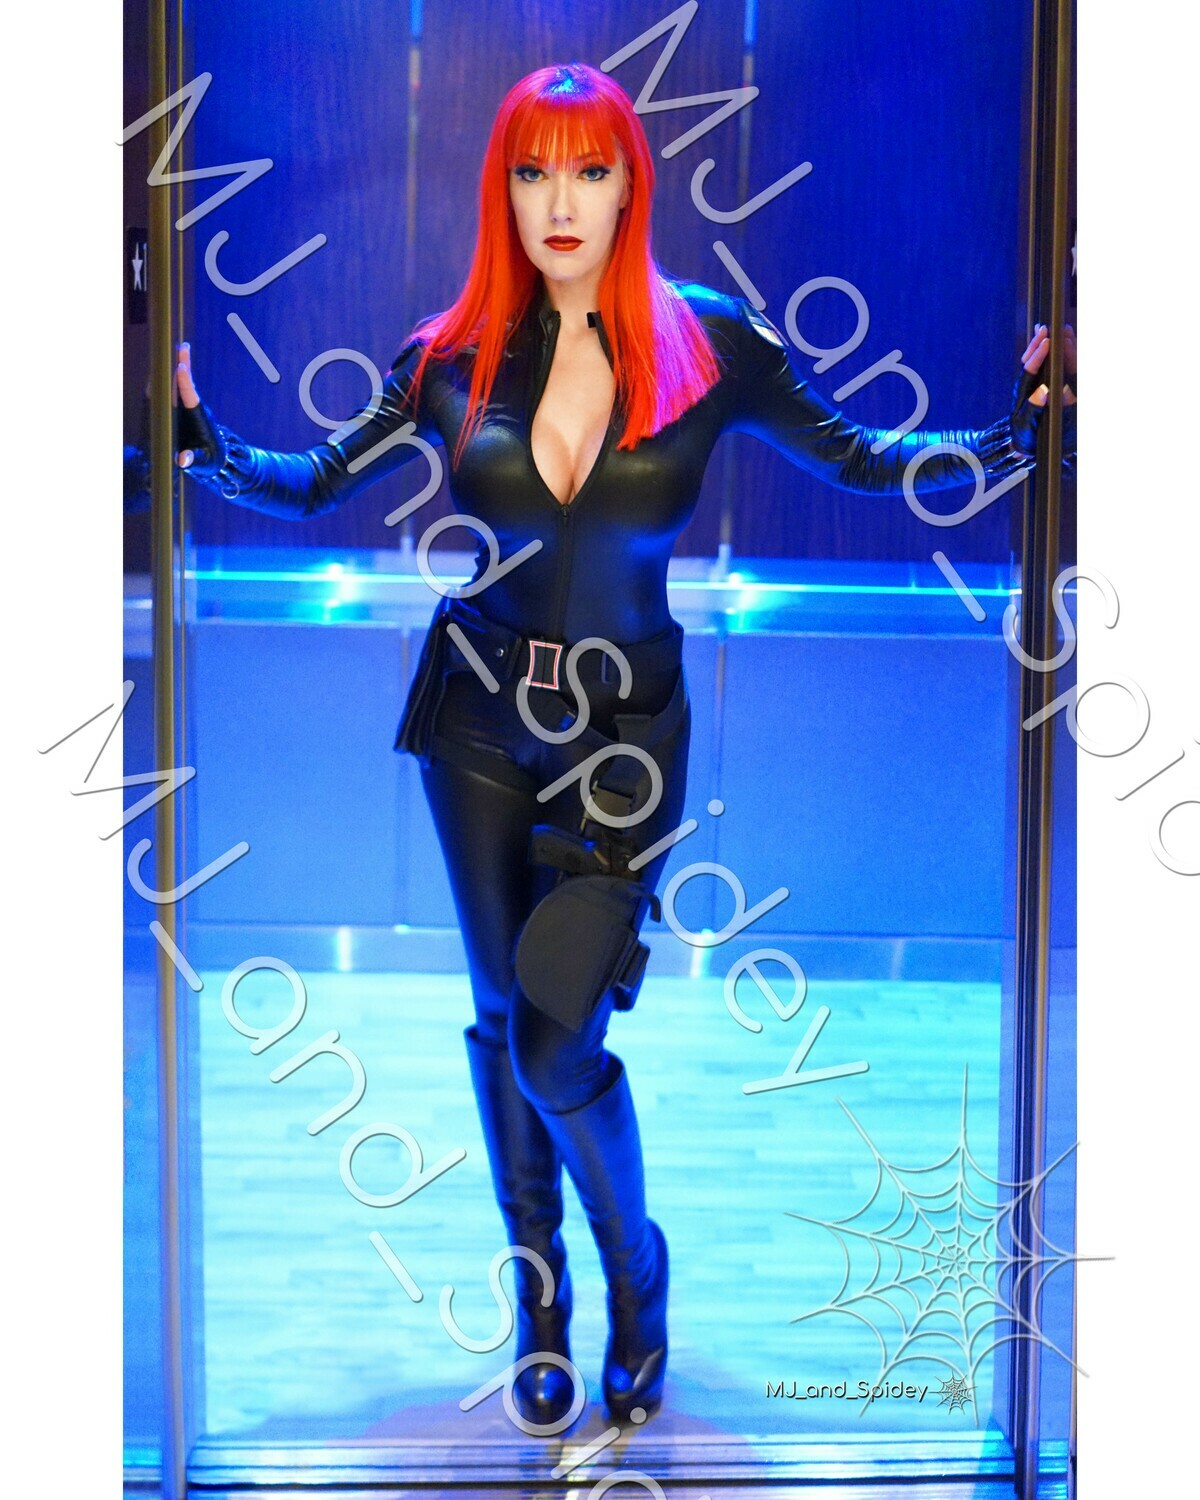 Marvel - Avengers - Black Widow 3 -  Cosplay Print (@MJ_and_Spidey, MJ and Spidey, Comics)